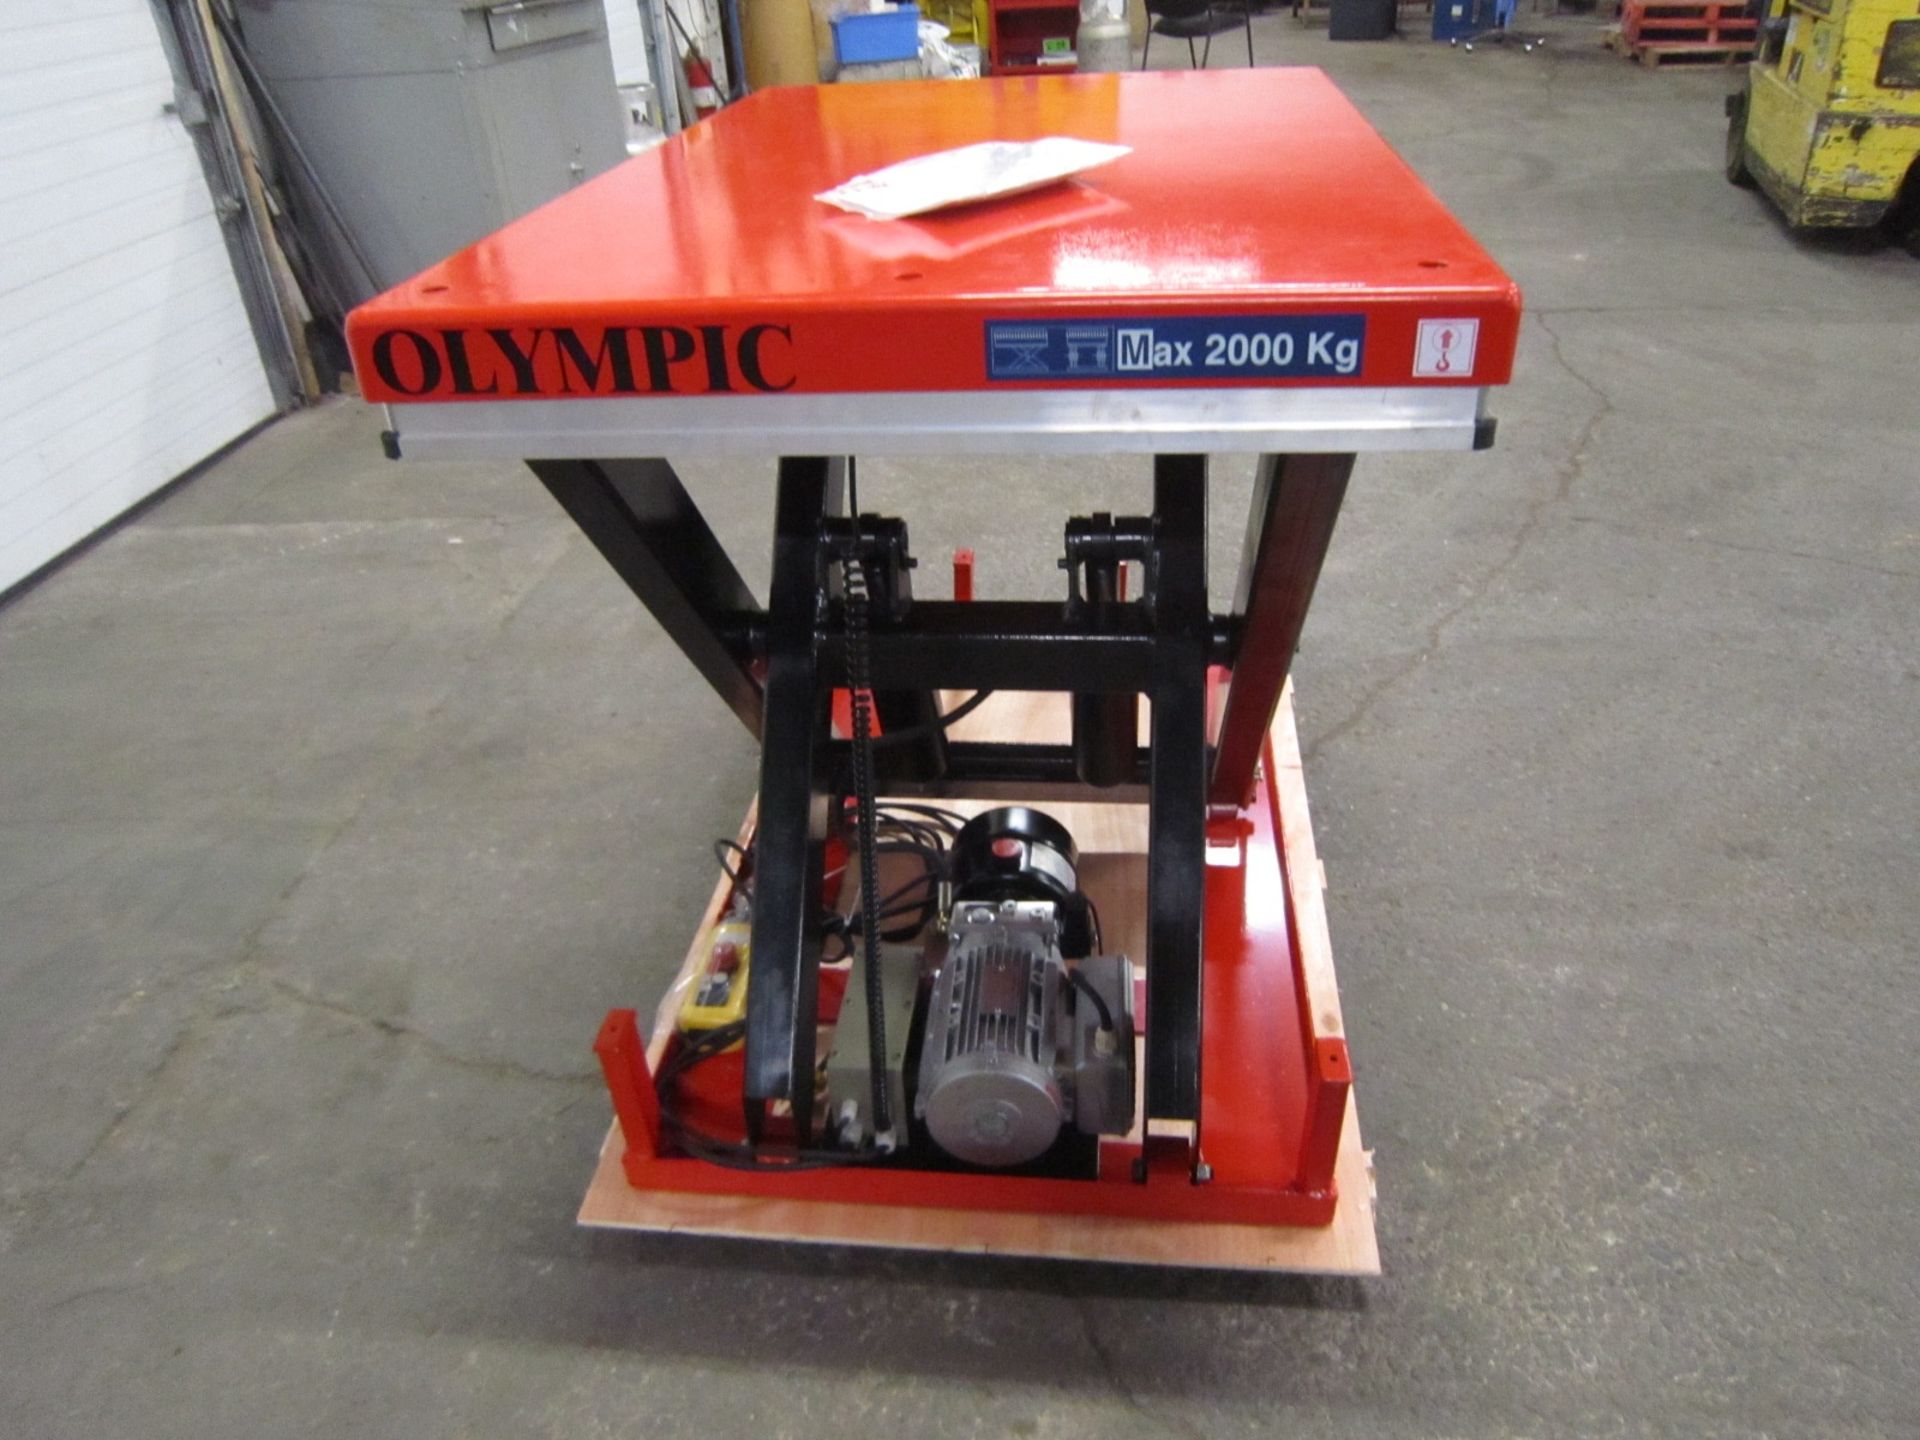 HW Hydraulic Lift Table 32" x 52" x 40" lift - 4000lbs capacity - UNUSED and MINT - 115V - Image 2 of 2